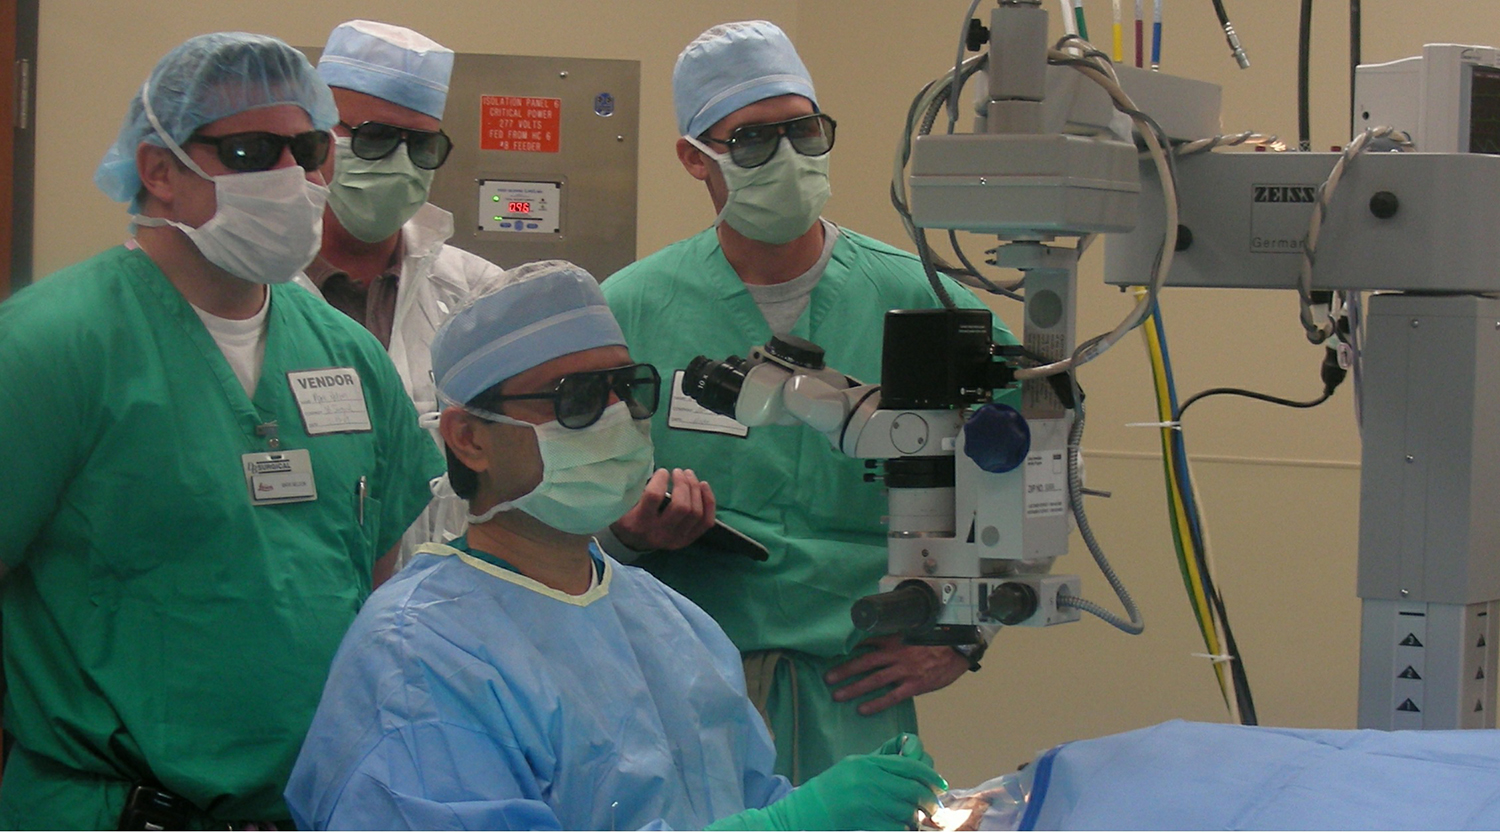 Dr. Gulani Performing Surgery With Other Doctors Watching